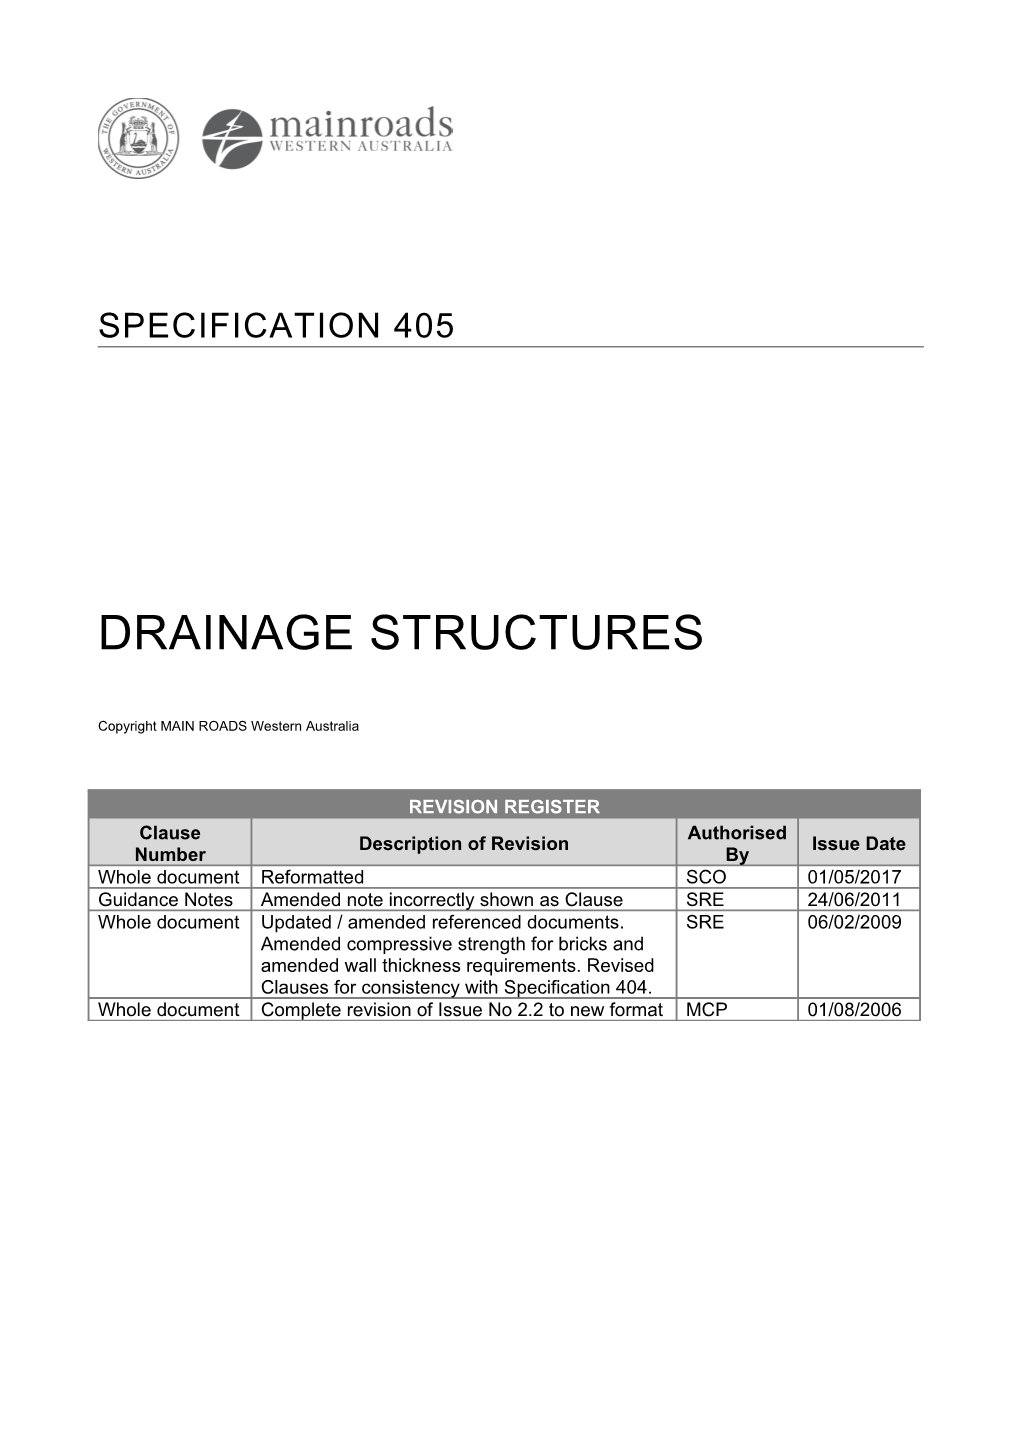 Drainage Structures